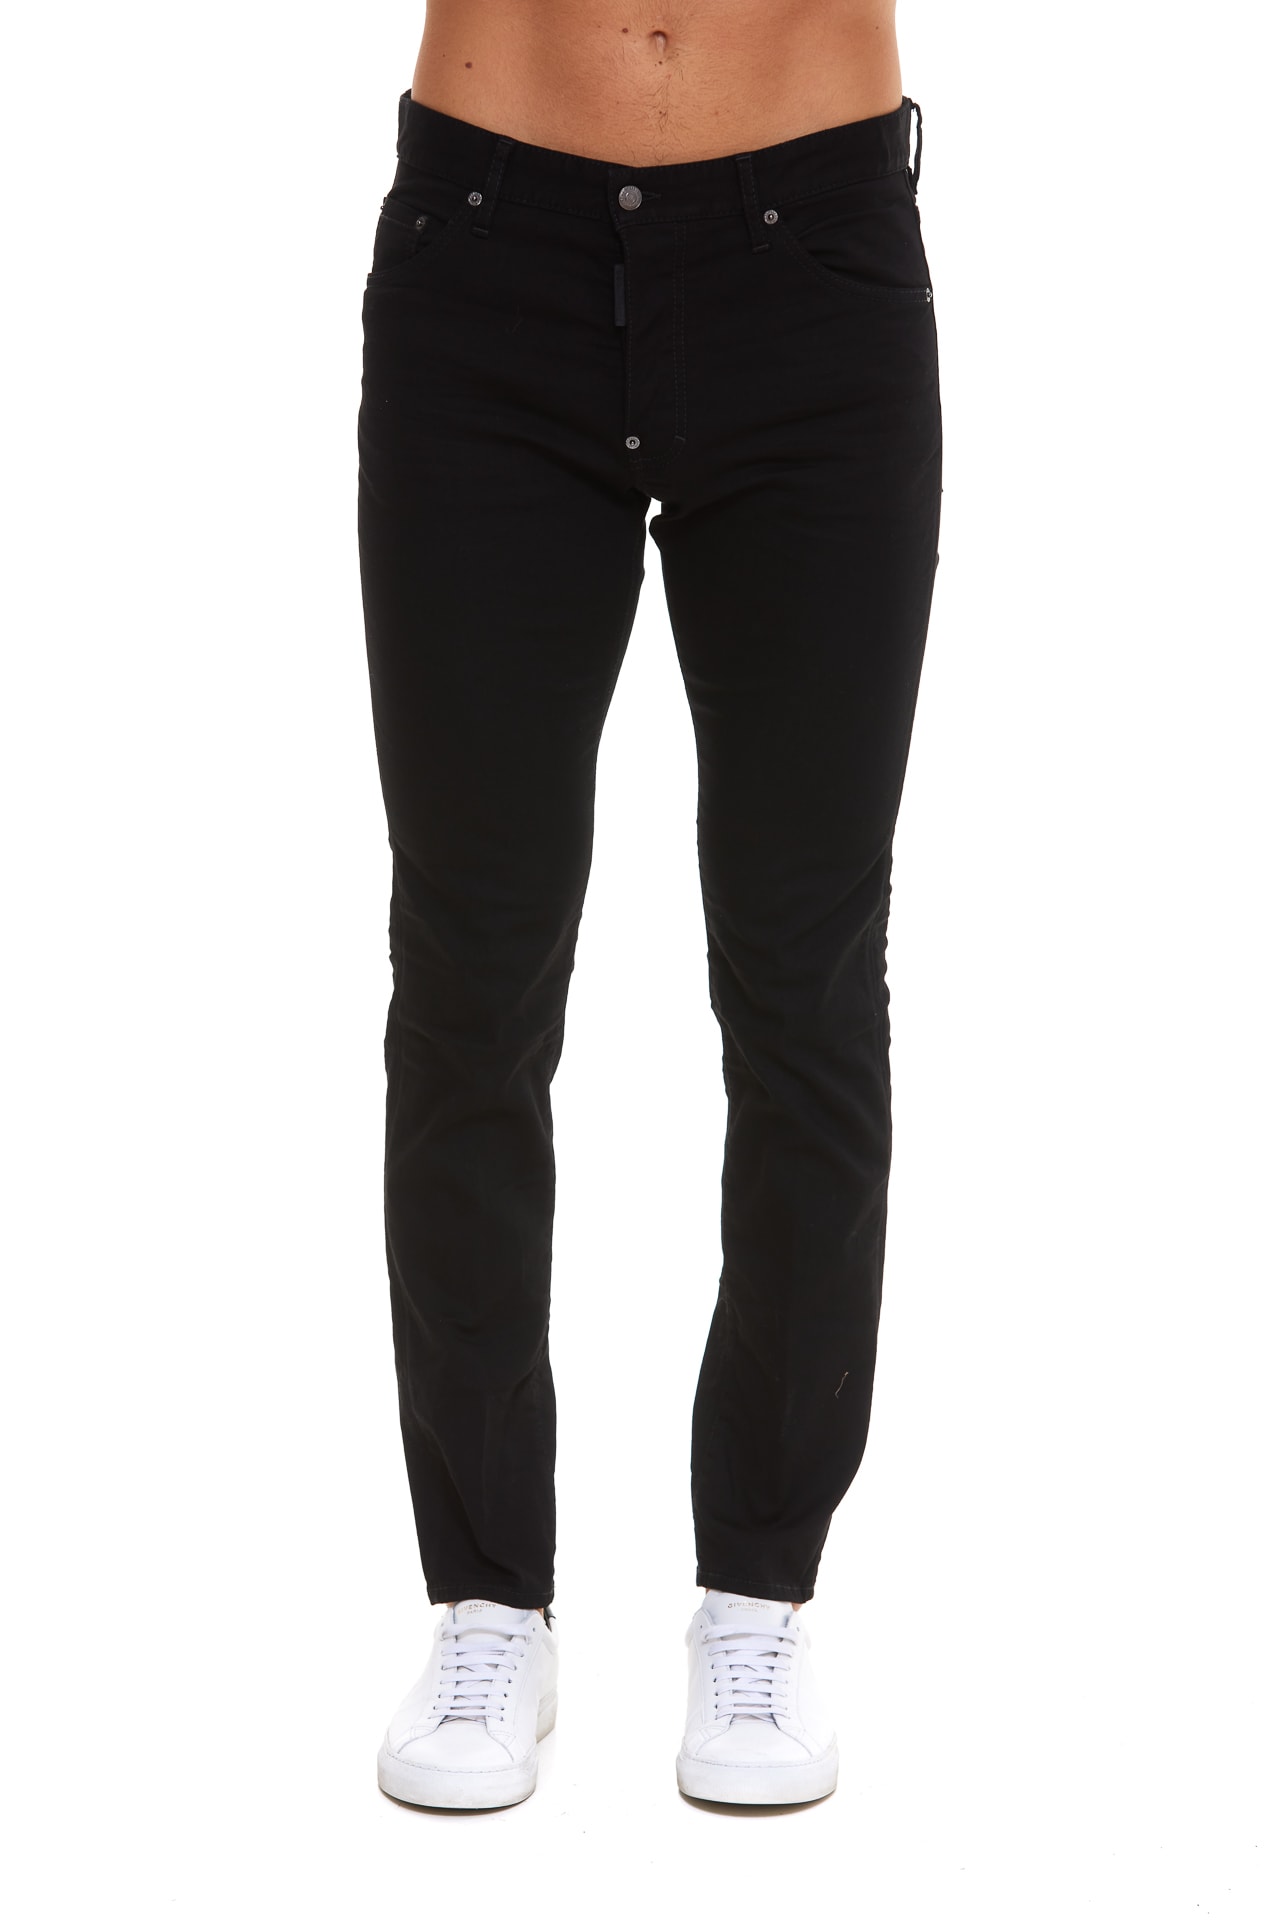 Dsquared2 Cool Guy Skinny Jeans